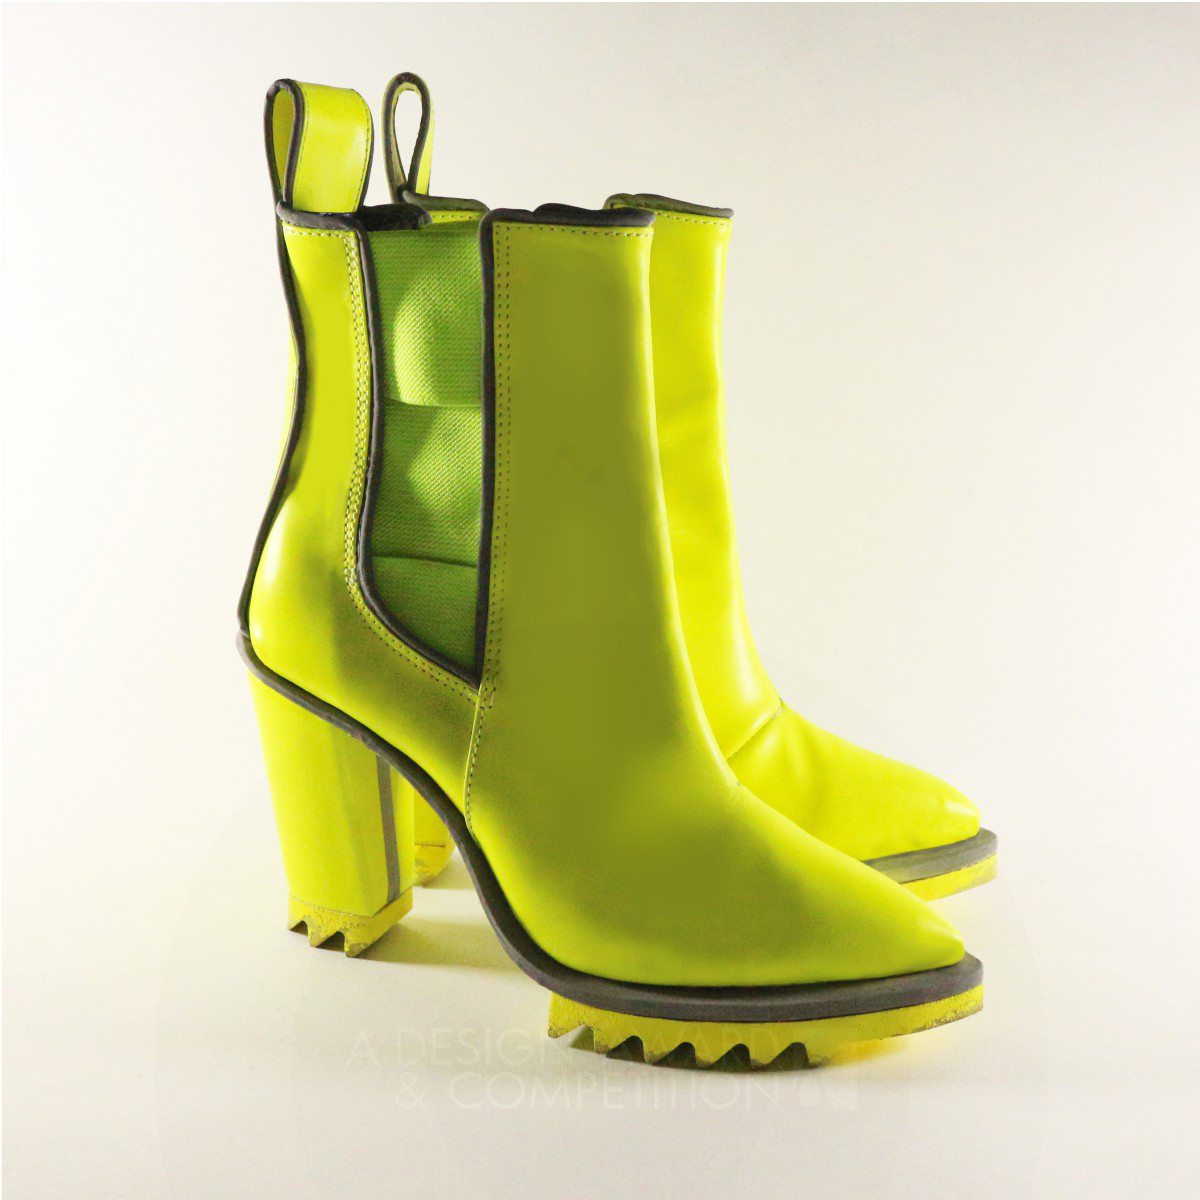 Kaiqi Wang wins Iron at the prestigious A' Footwear, Shoes and Boots Design Award with Guang Chelsea Boots.